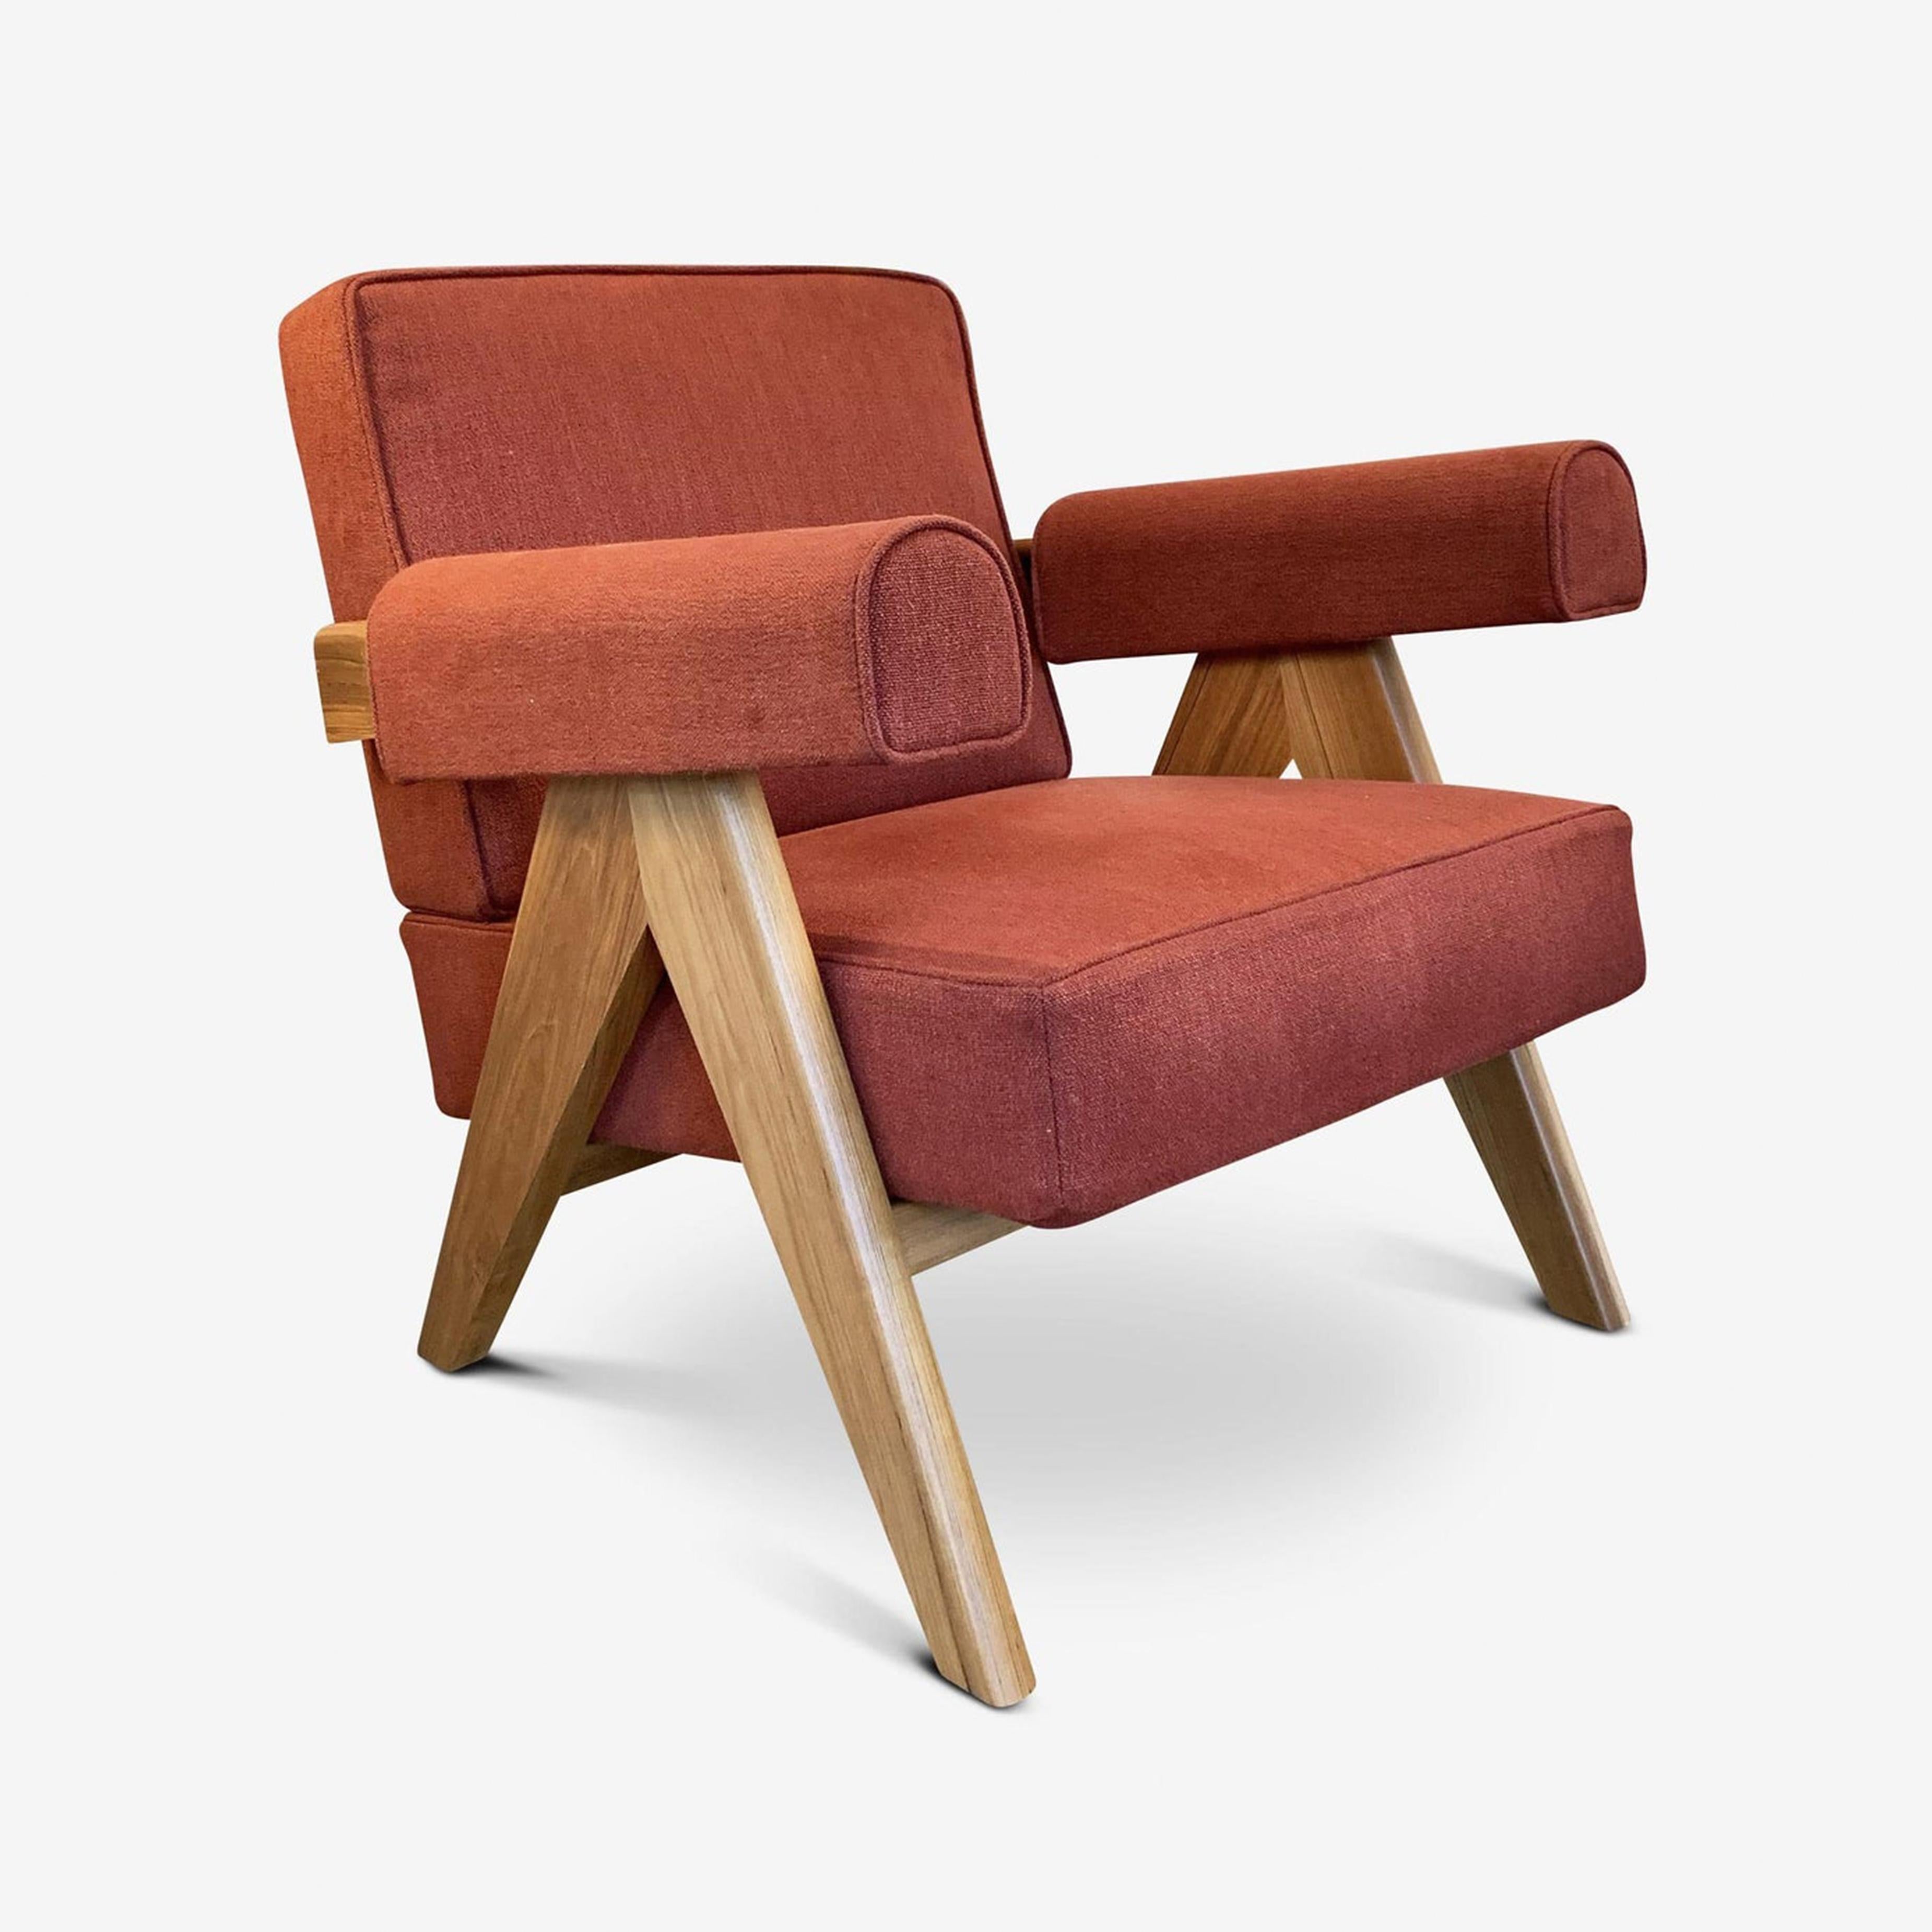 Armchairdesigned by Pierre Jeanneret circa 1950, relaunched in 2019.
Manufactured by Cassina in Italy.

Included in UNESCO’s 2016 Cultural Heritage list, the extraordinary architecture of Le Corbusier’s Capitol Complex, designed by Chandigarh in